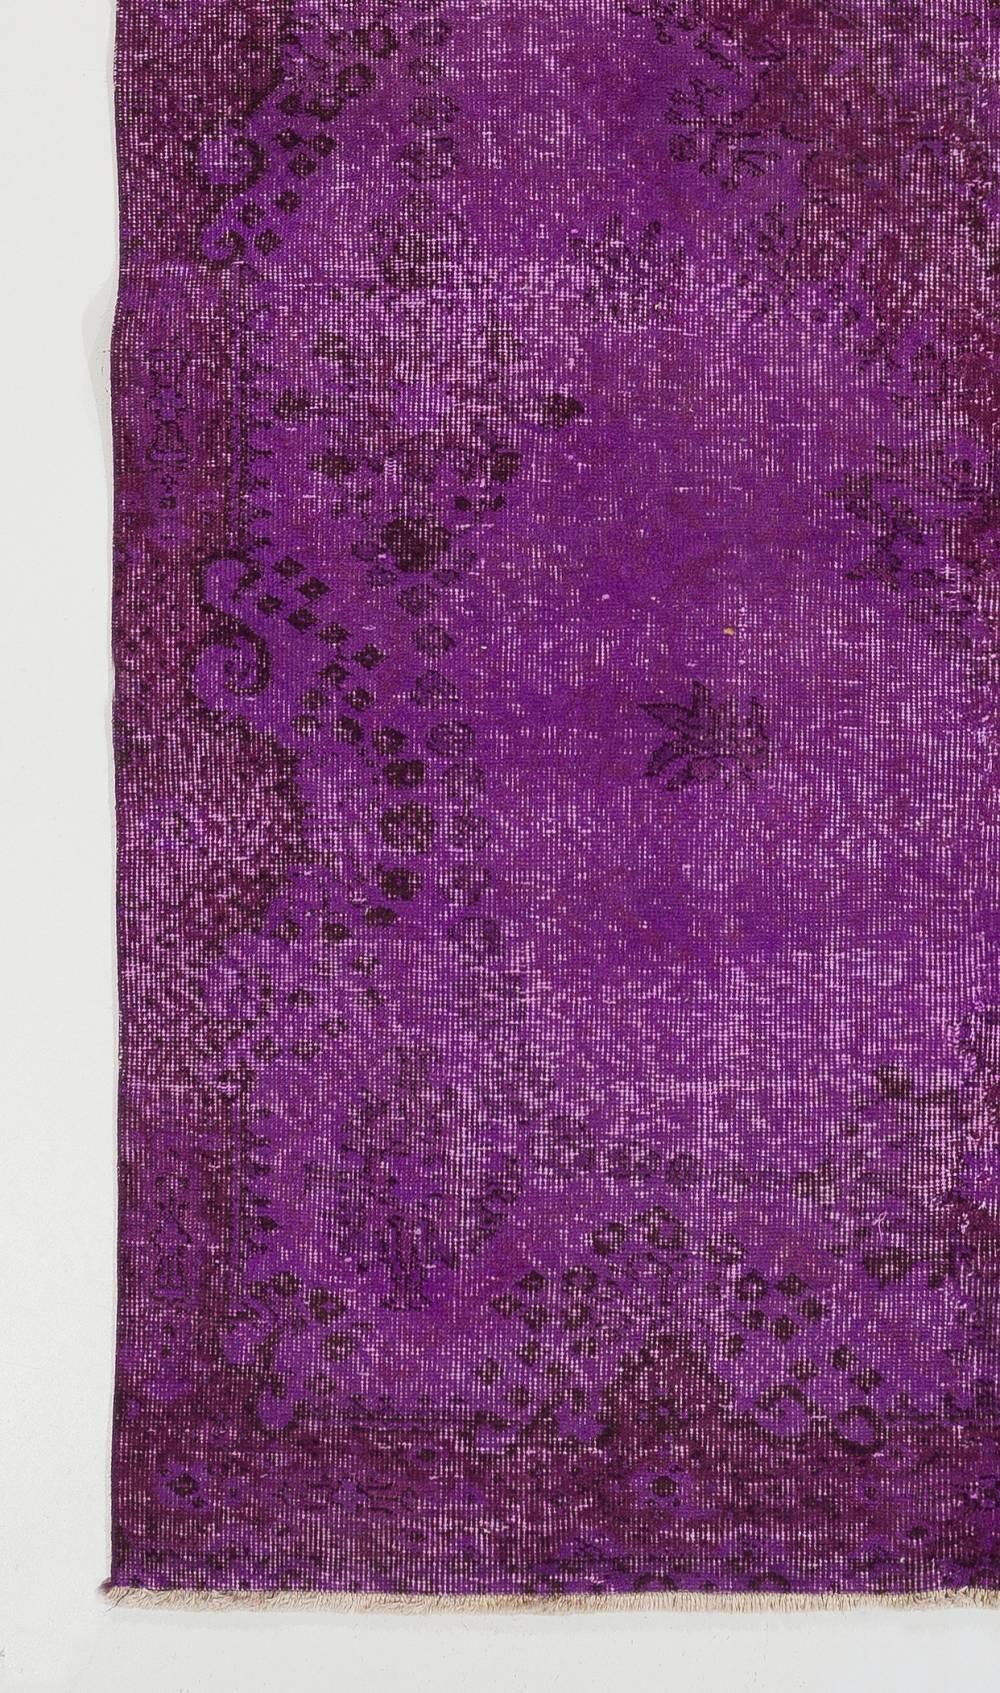 Hand-Woven 5x8.7 Ft Modern Area Rug in Purple. Hand-Knotted in Turkey. Vintage Wool Carpet